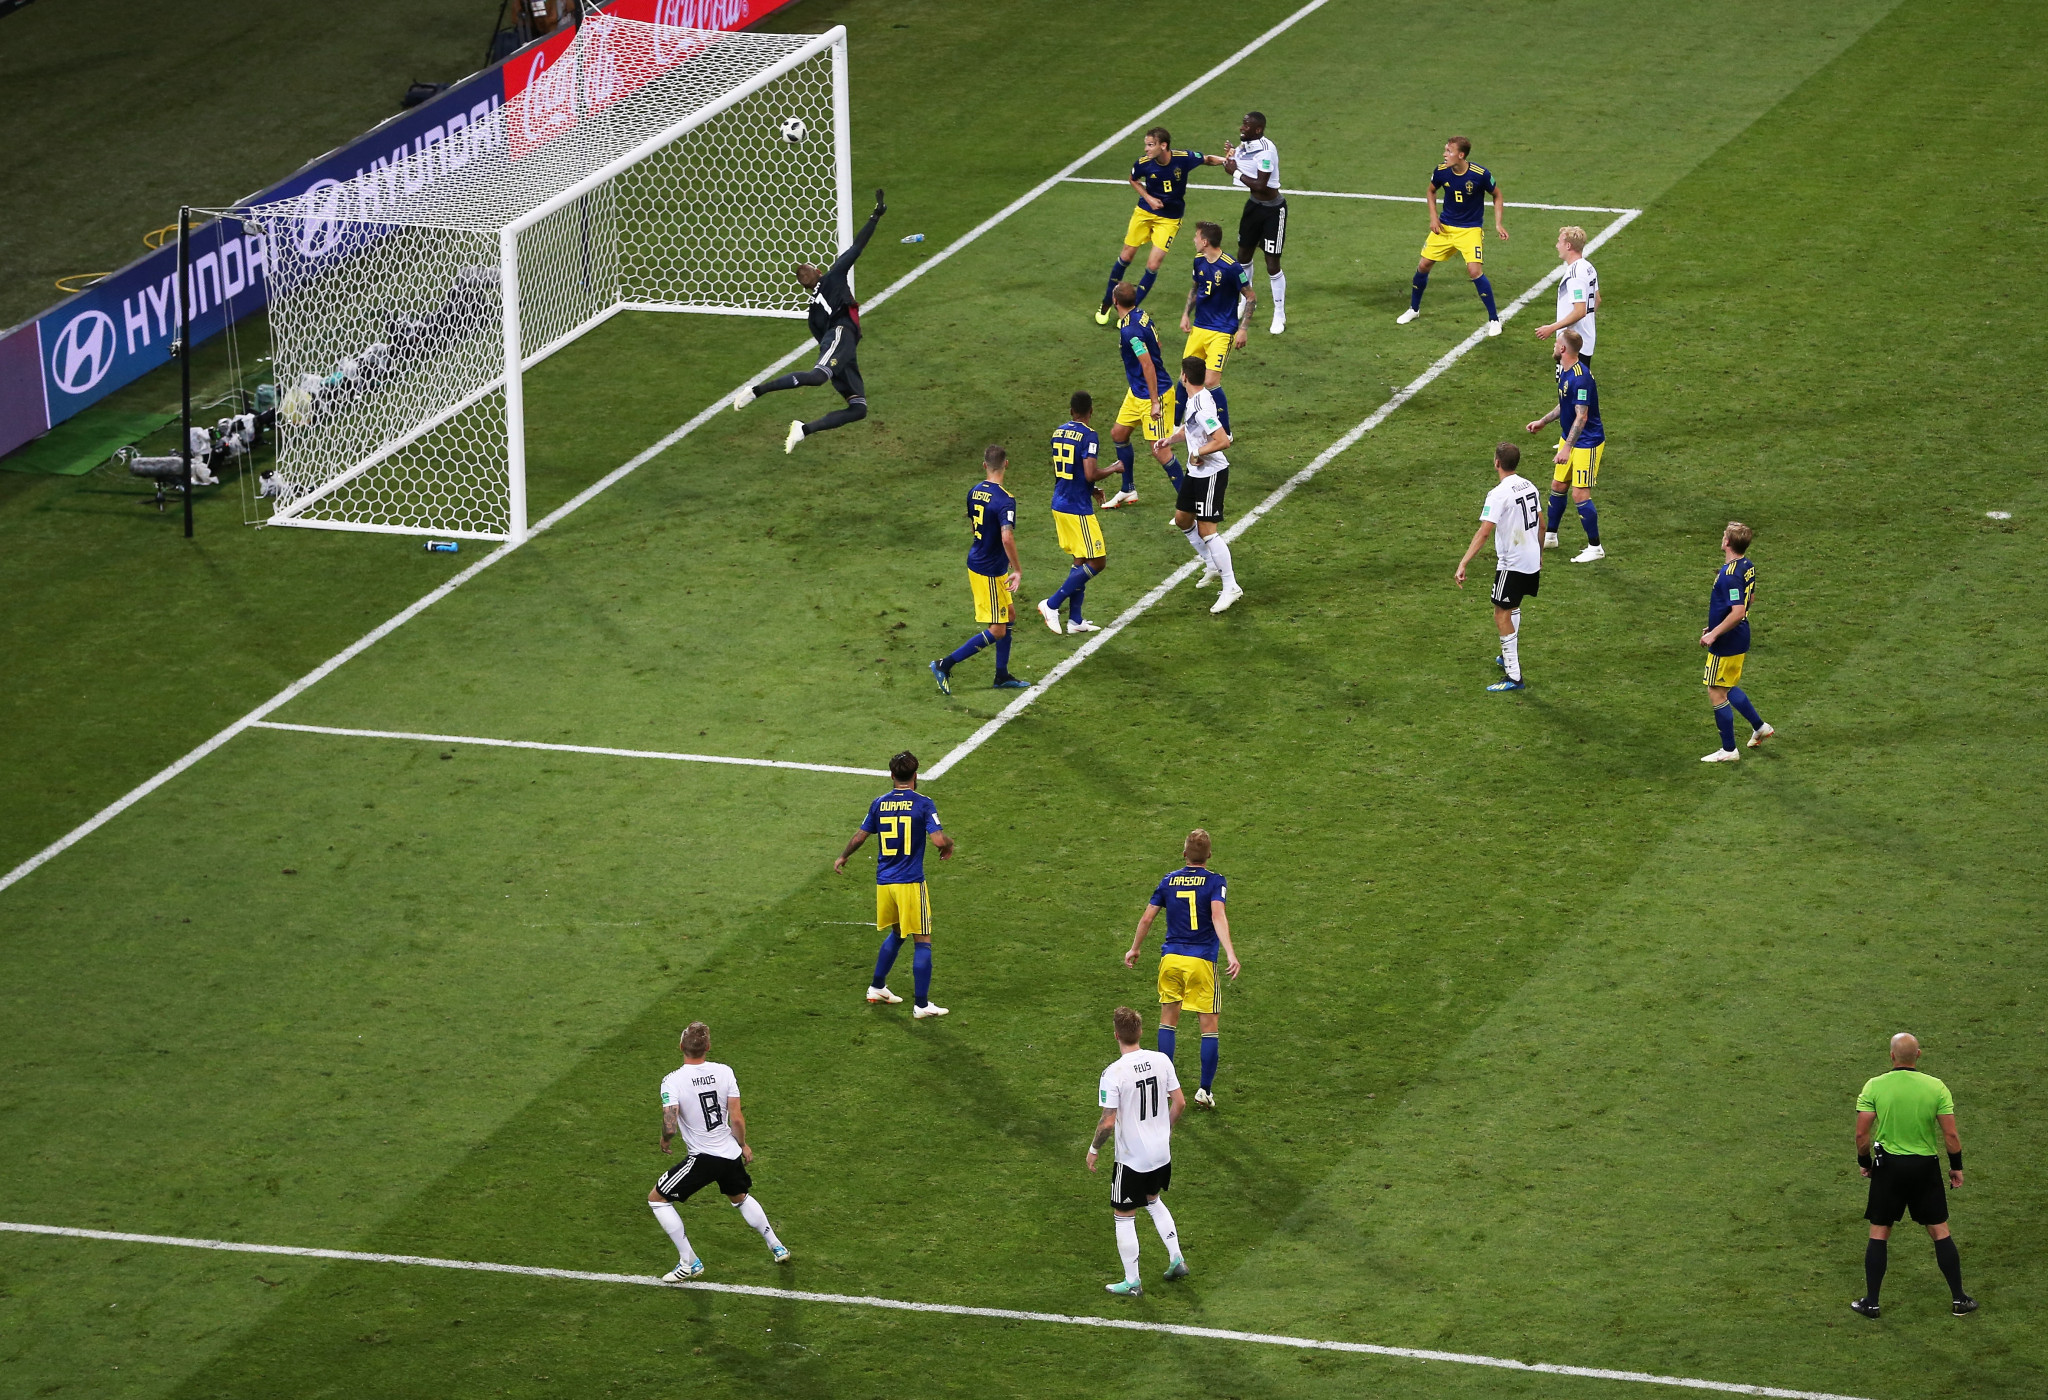 Toni Kroos' late free kick gave Germany a crucial victory over Sweden ©Getty Images